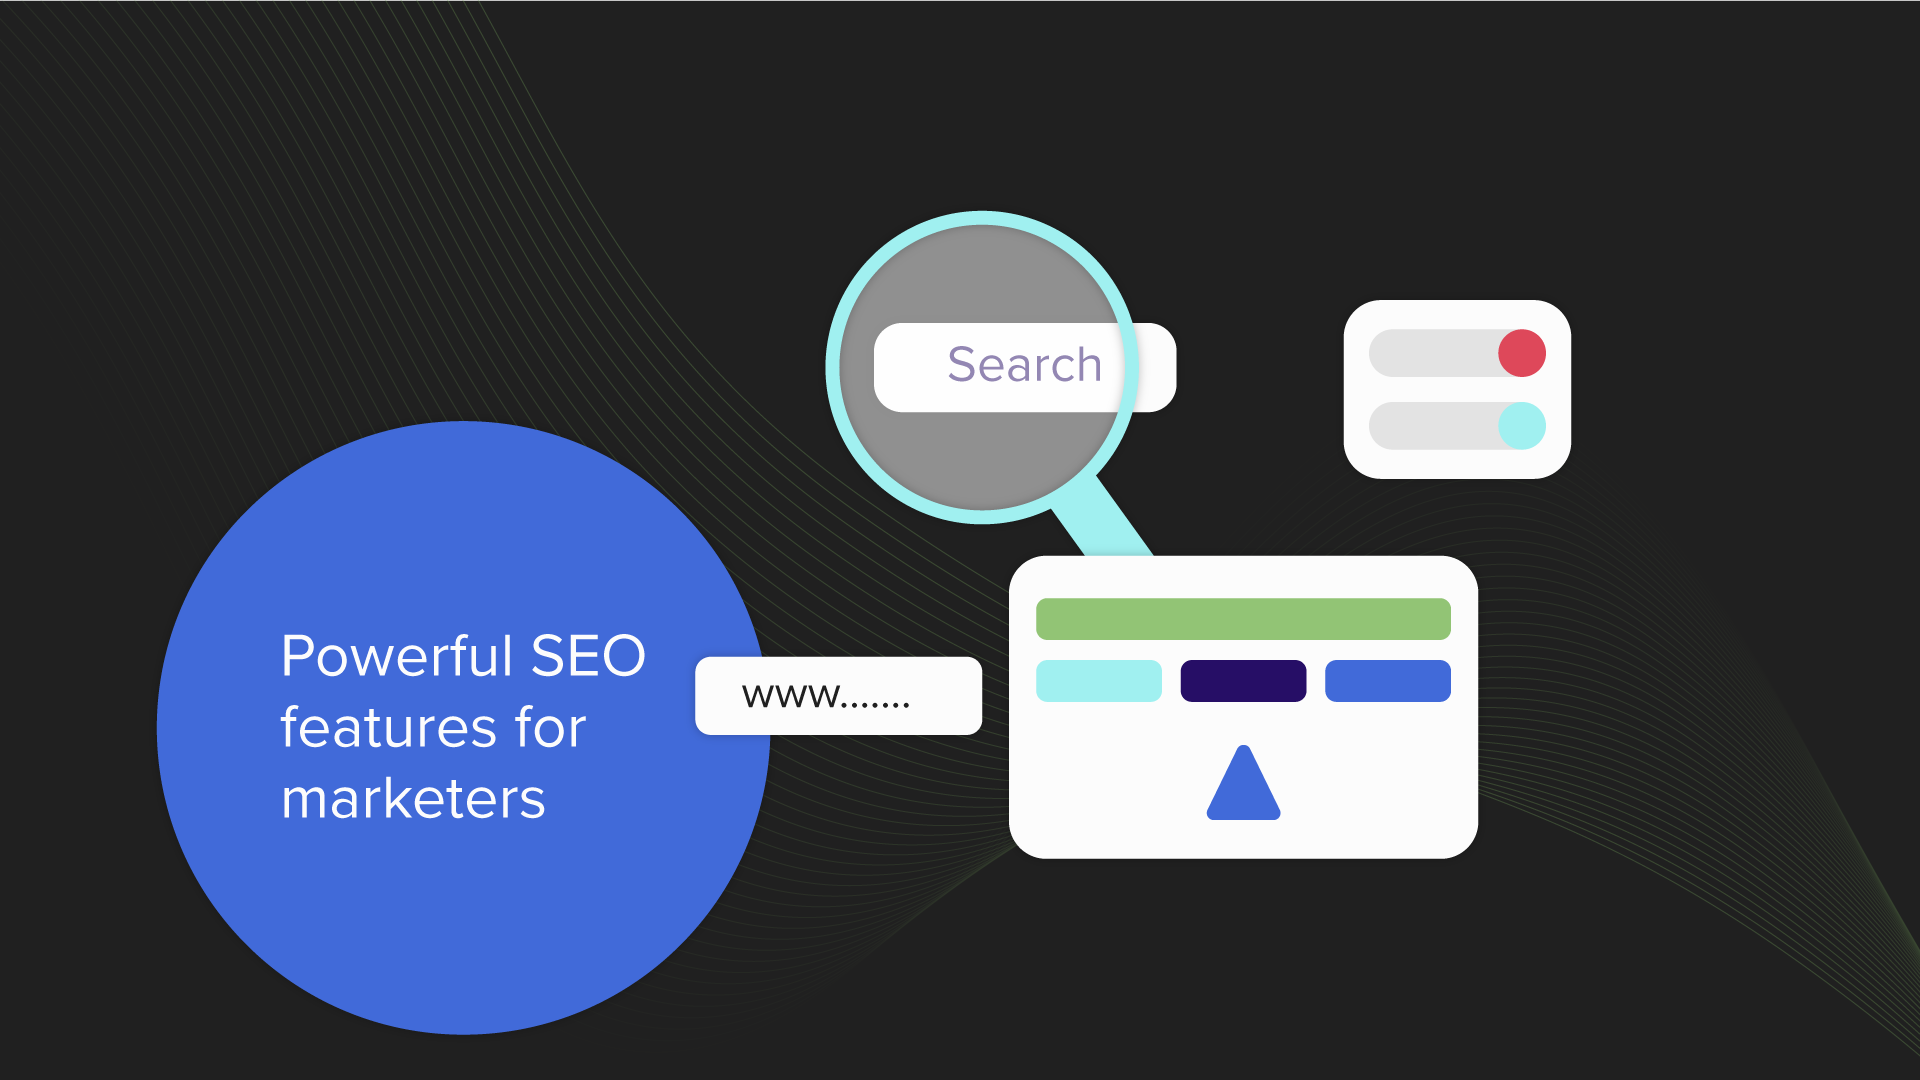 Powerful SEO features for marketers